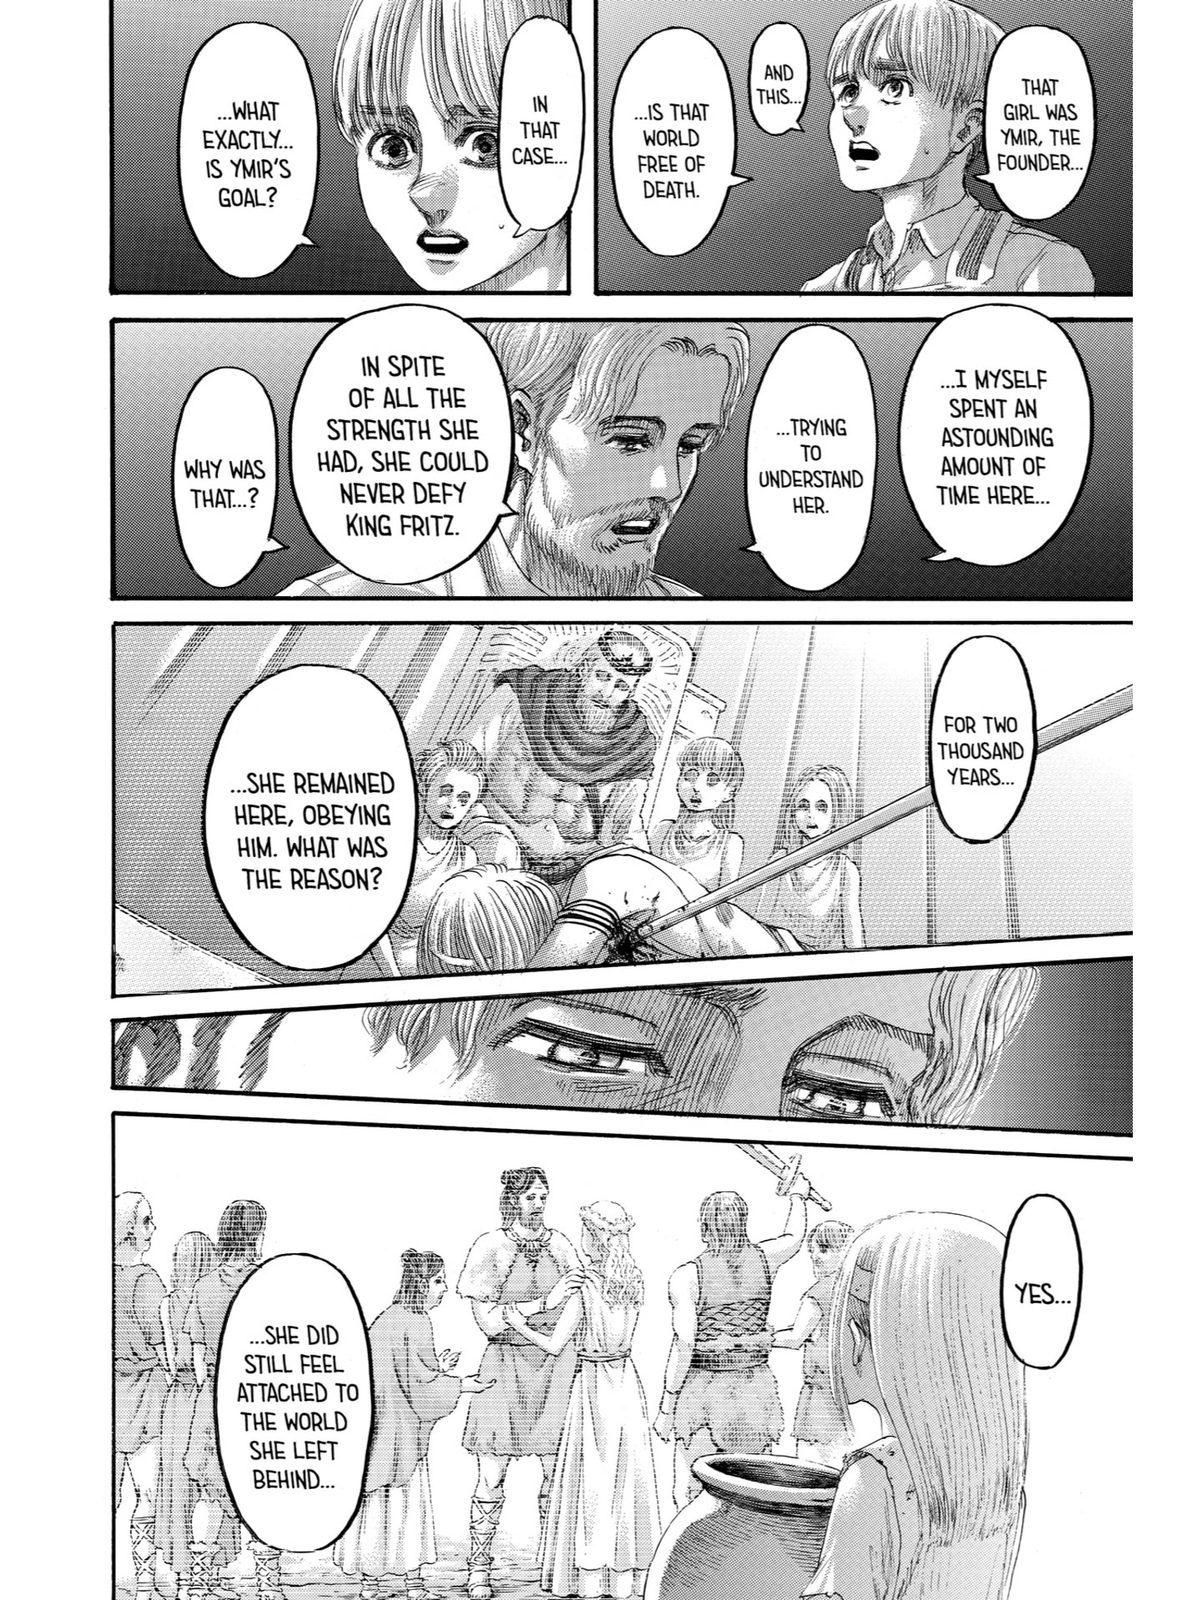 Attack on Titan Was a Twisted Love Story